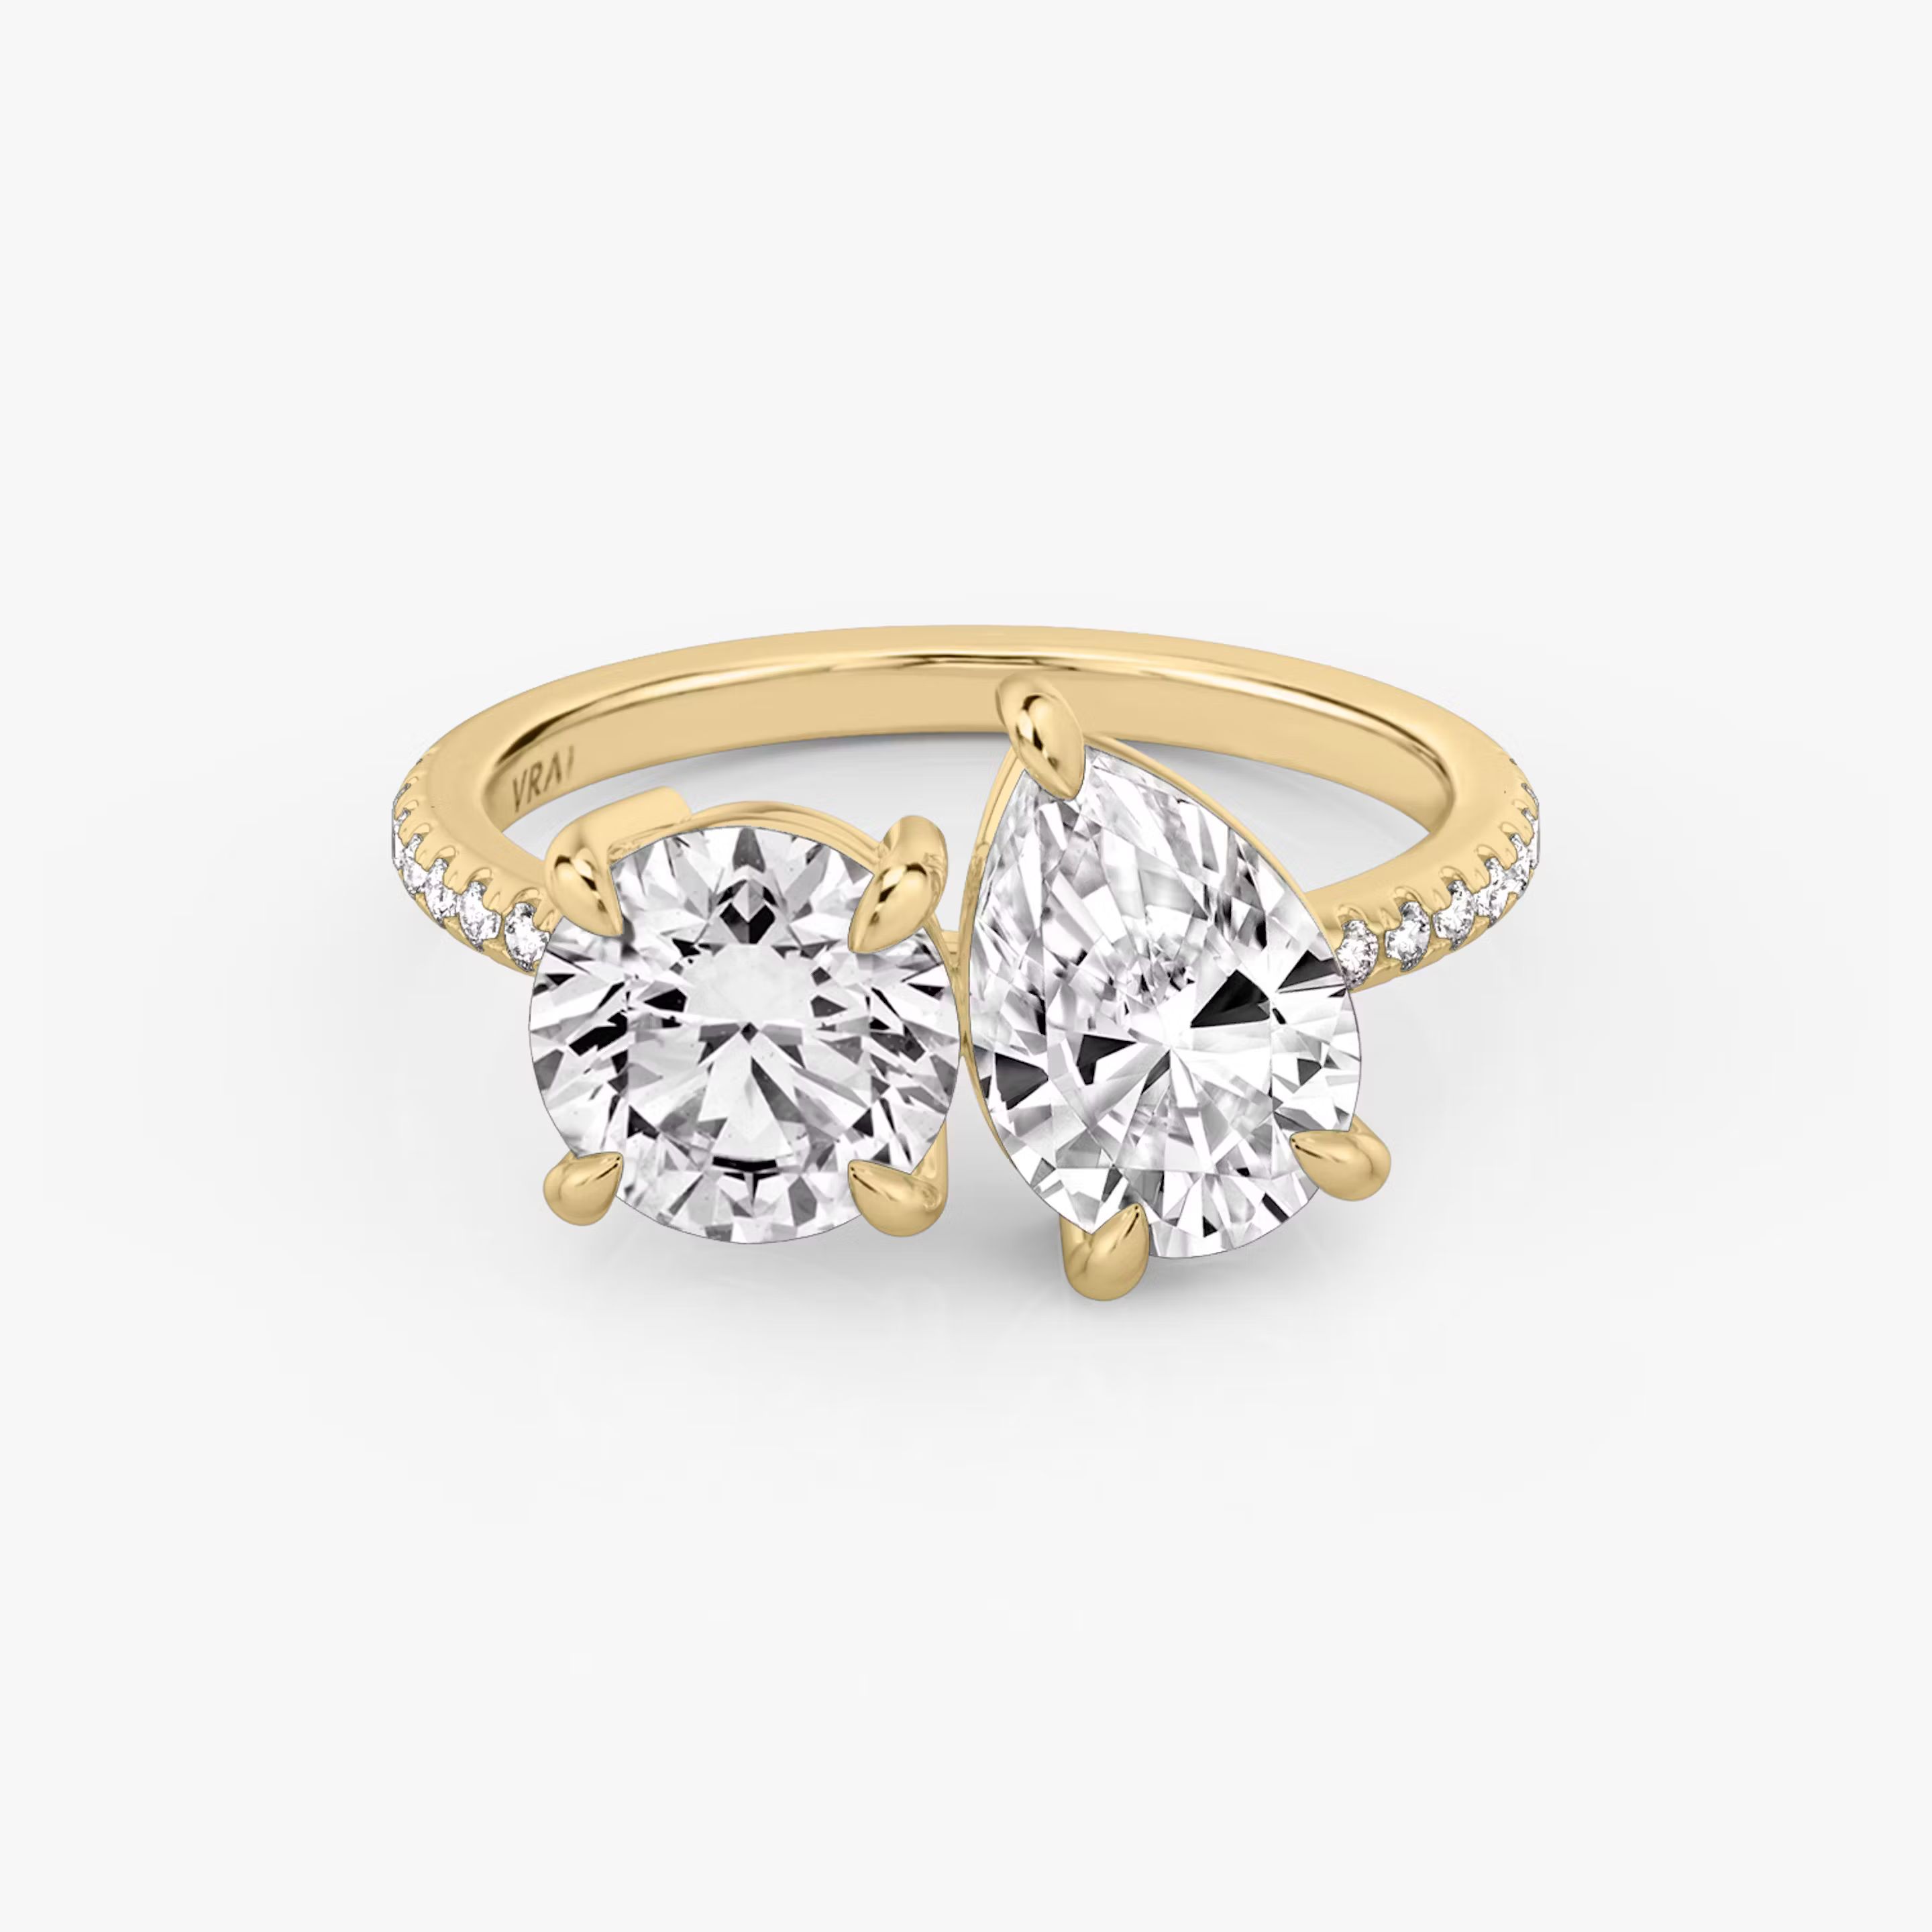 The Toi et Moi Round Brilliant and Pear Engagement Ring | Vrai and Oro